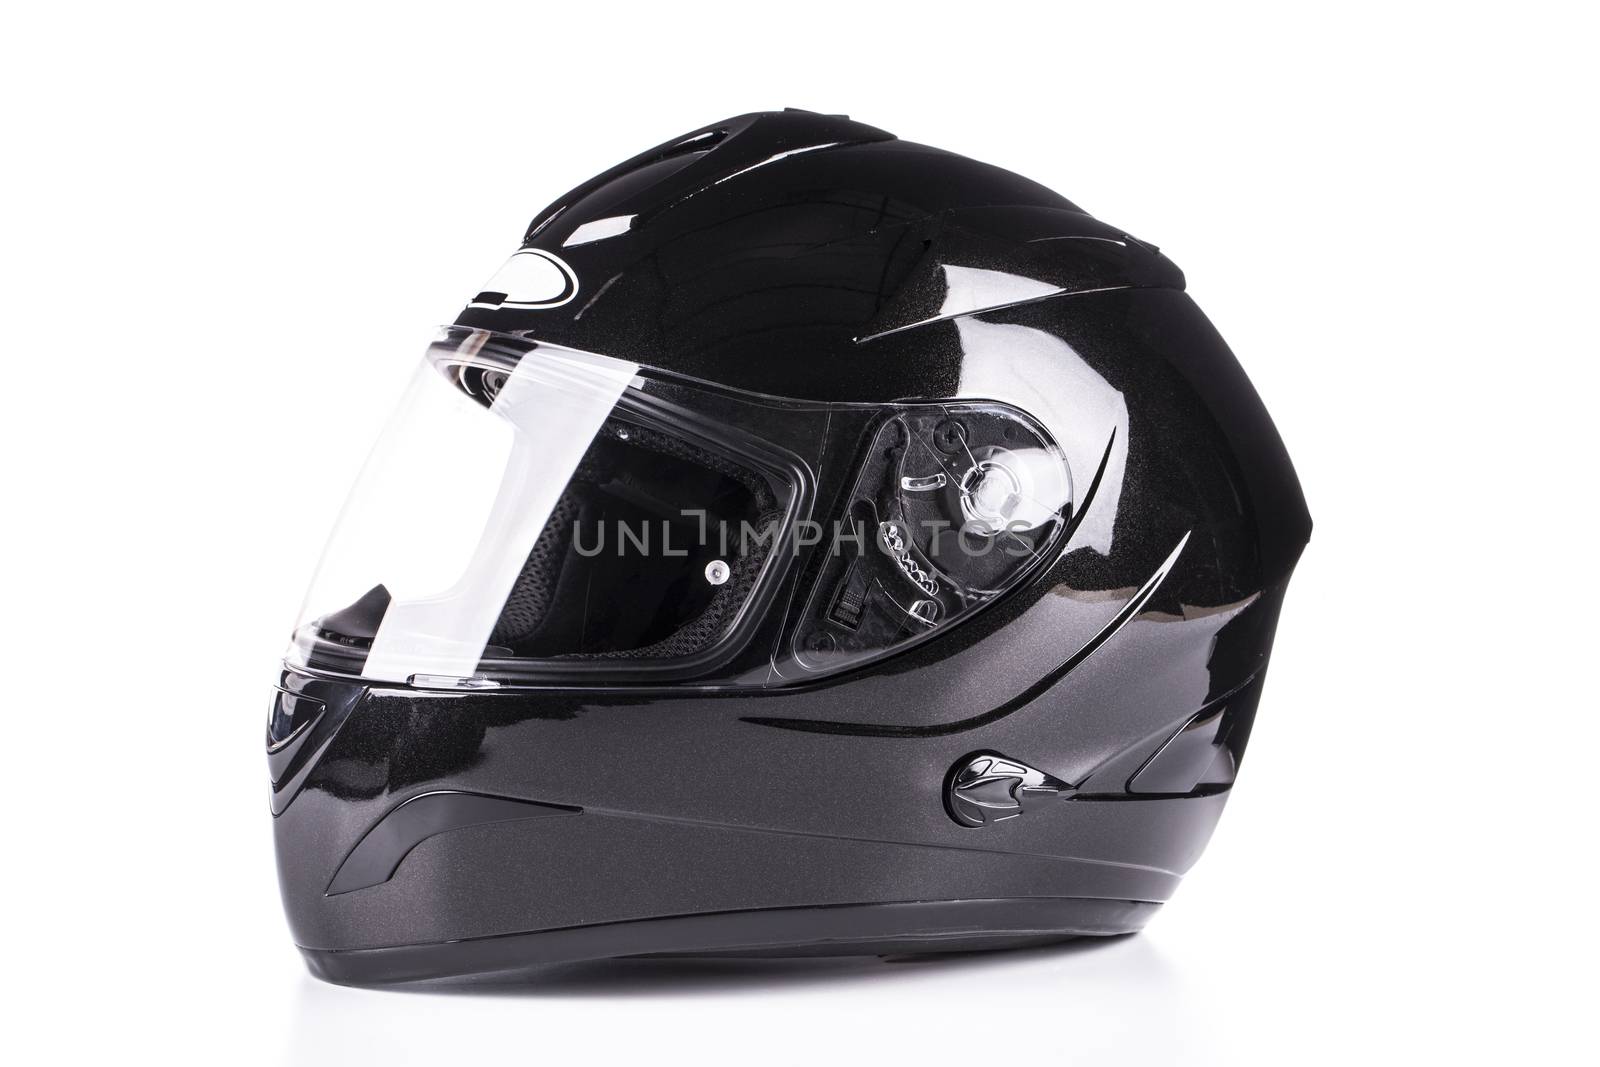 Black helmet Isolated on white background by ozaiachin